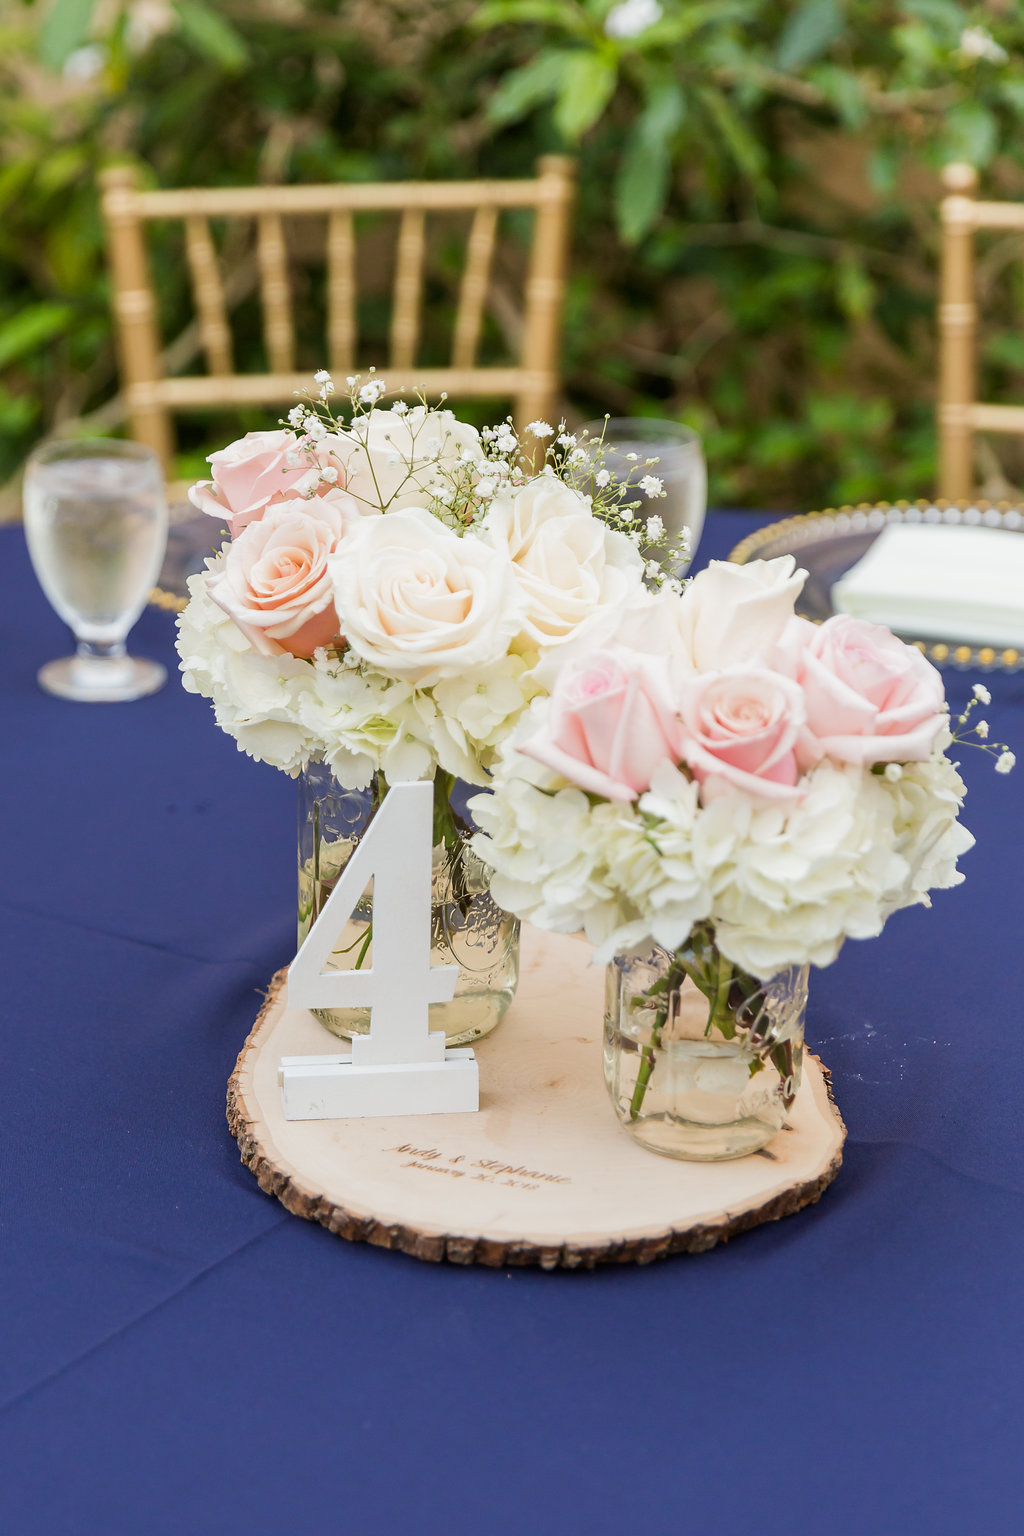 The Curtiss Mansion wedding had dinner in the courtyard with navy blue linens, gold beaded charger plates, gold chiavari chairs, and ivory seat cushions. The centerpieces were simple wood slabs, engraved with the couple's wedding details, a white wooden table number and mason jar floral vases